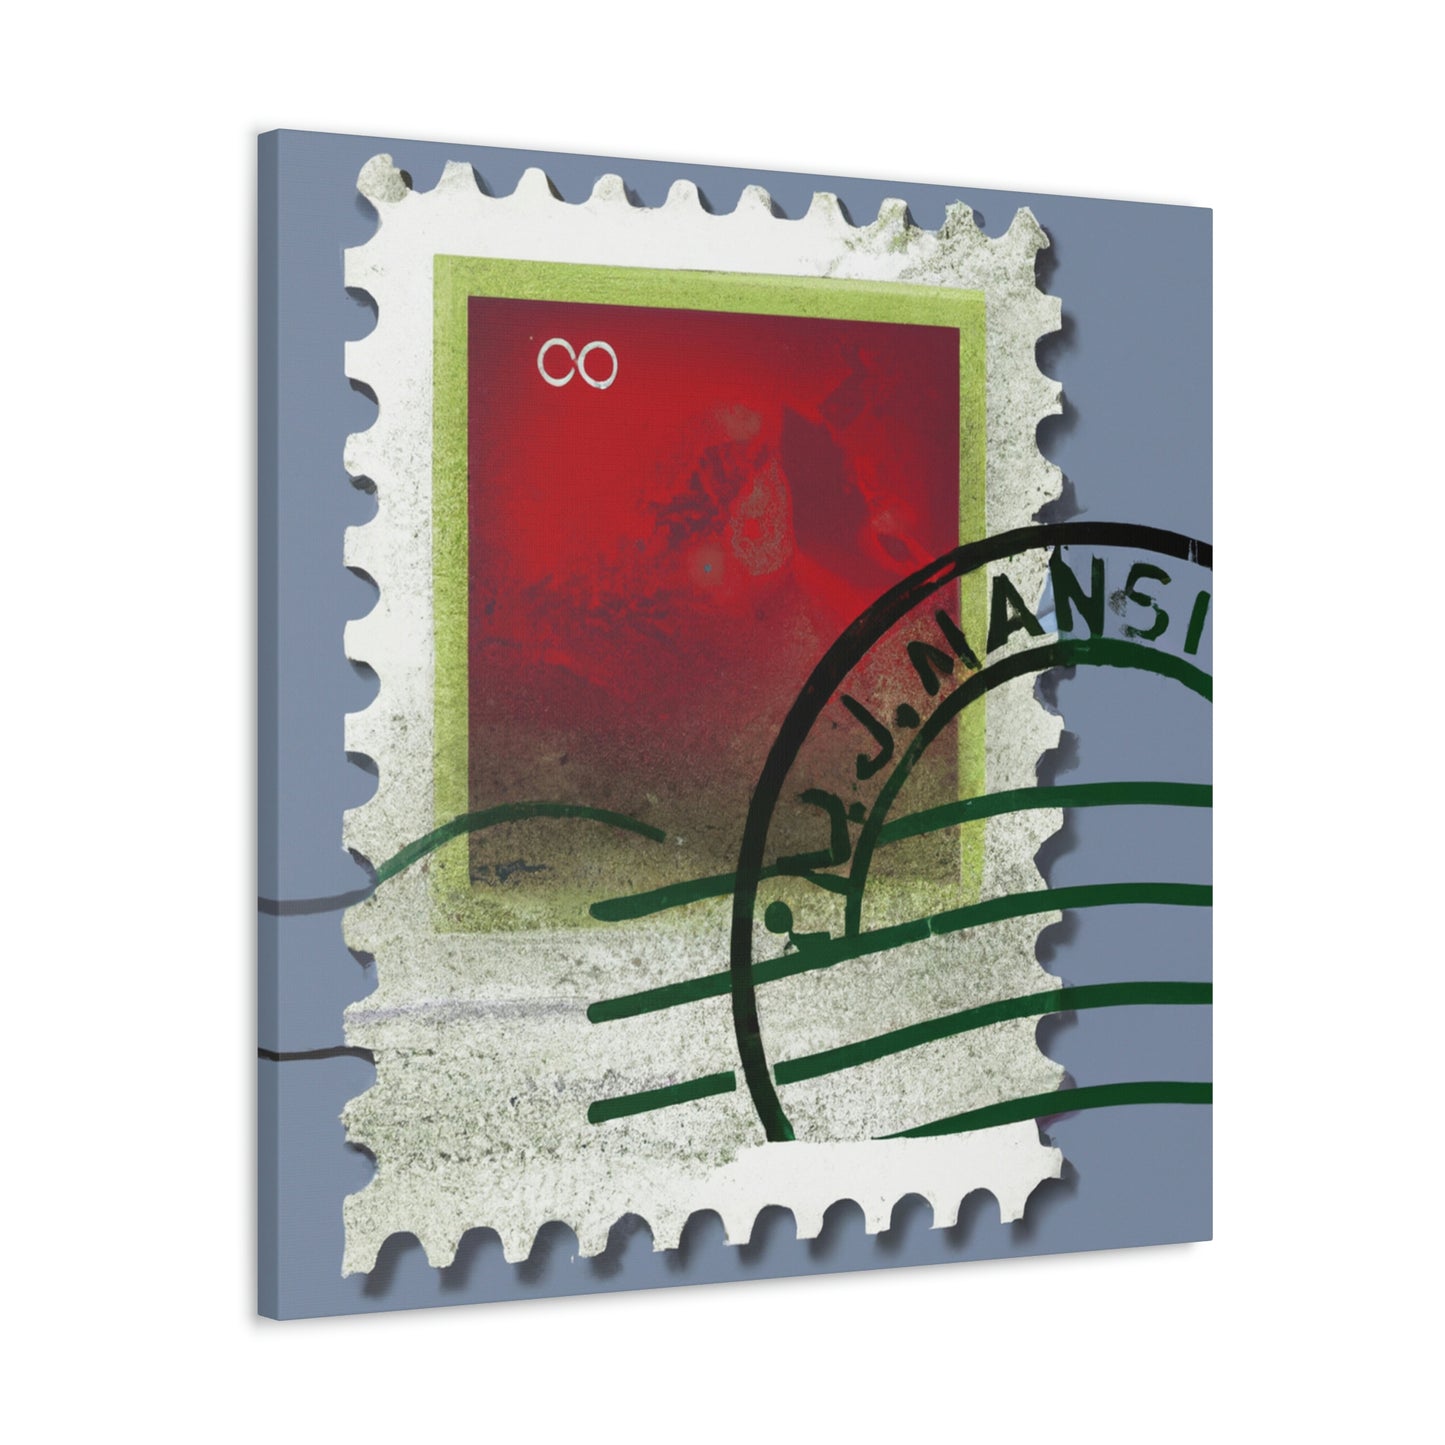 Global Greetings Stamps - Postage Stamp Collector Canvas Wall Art